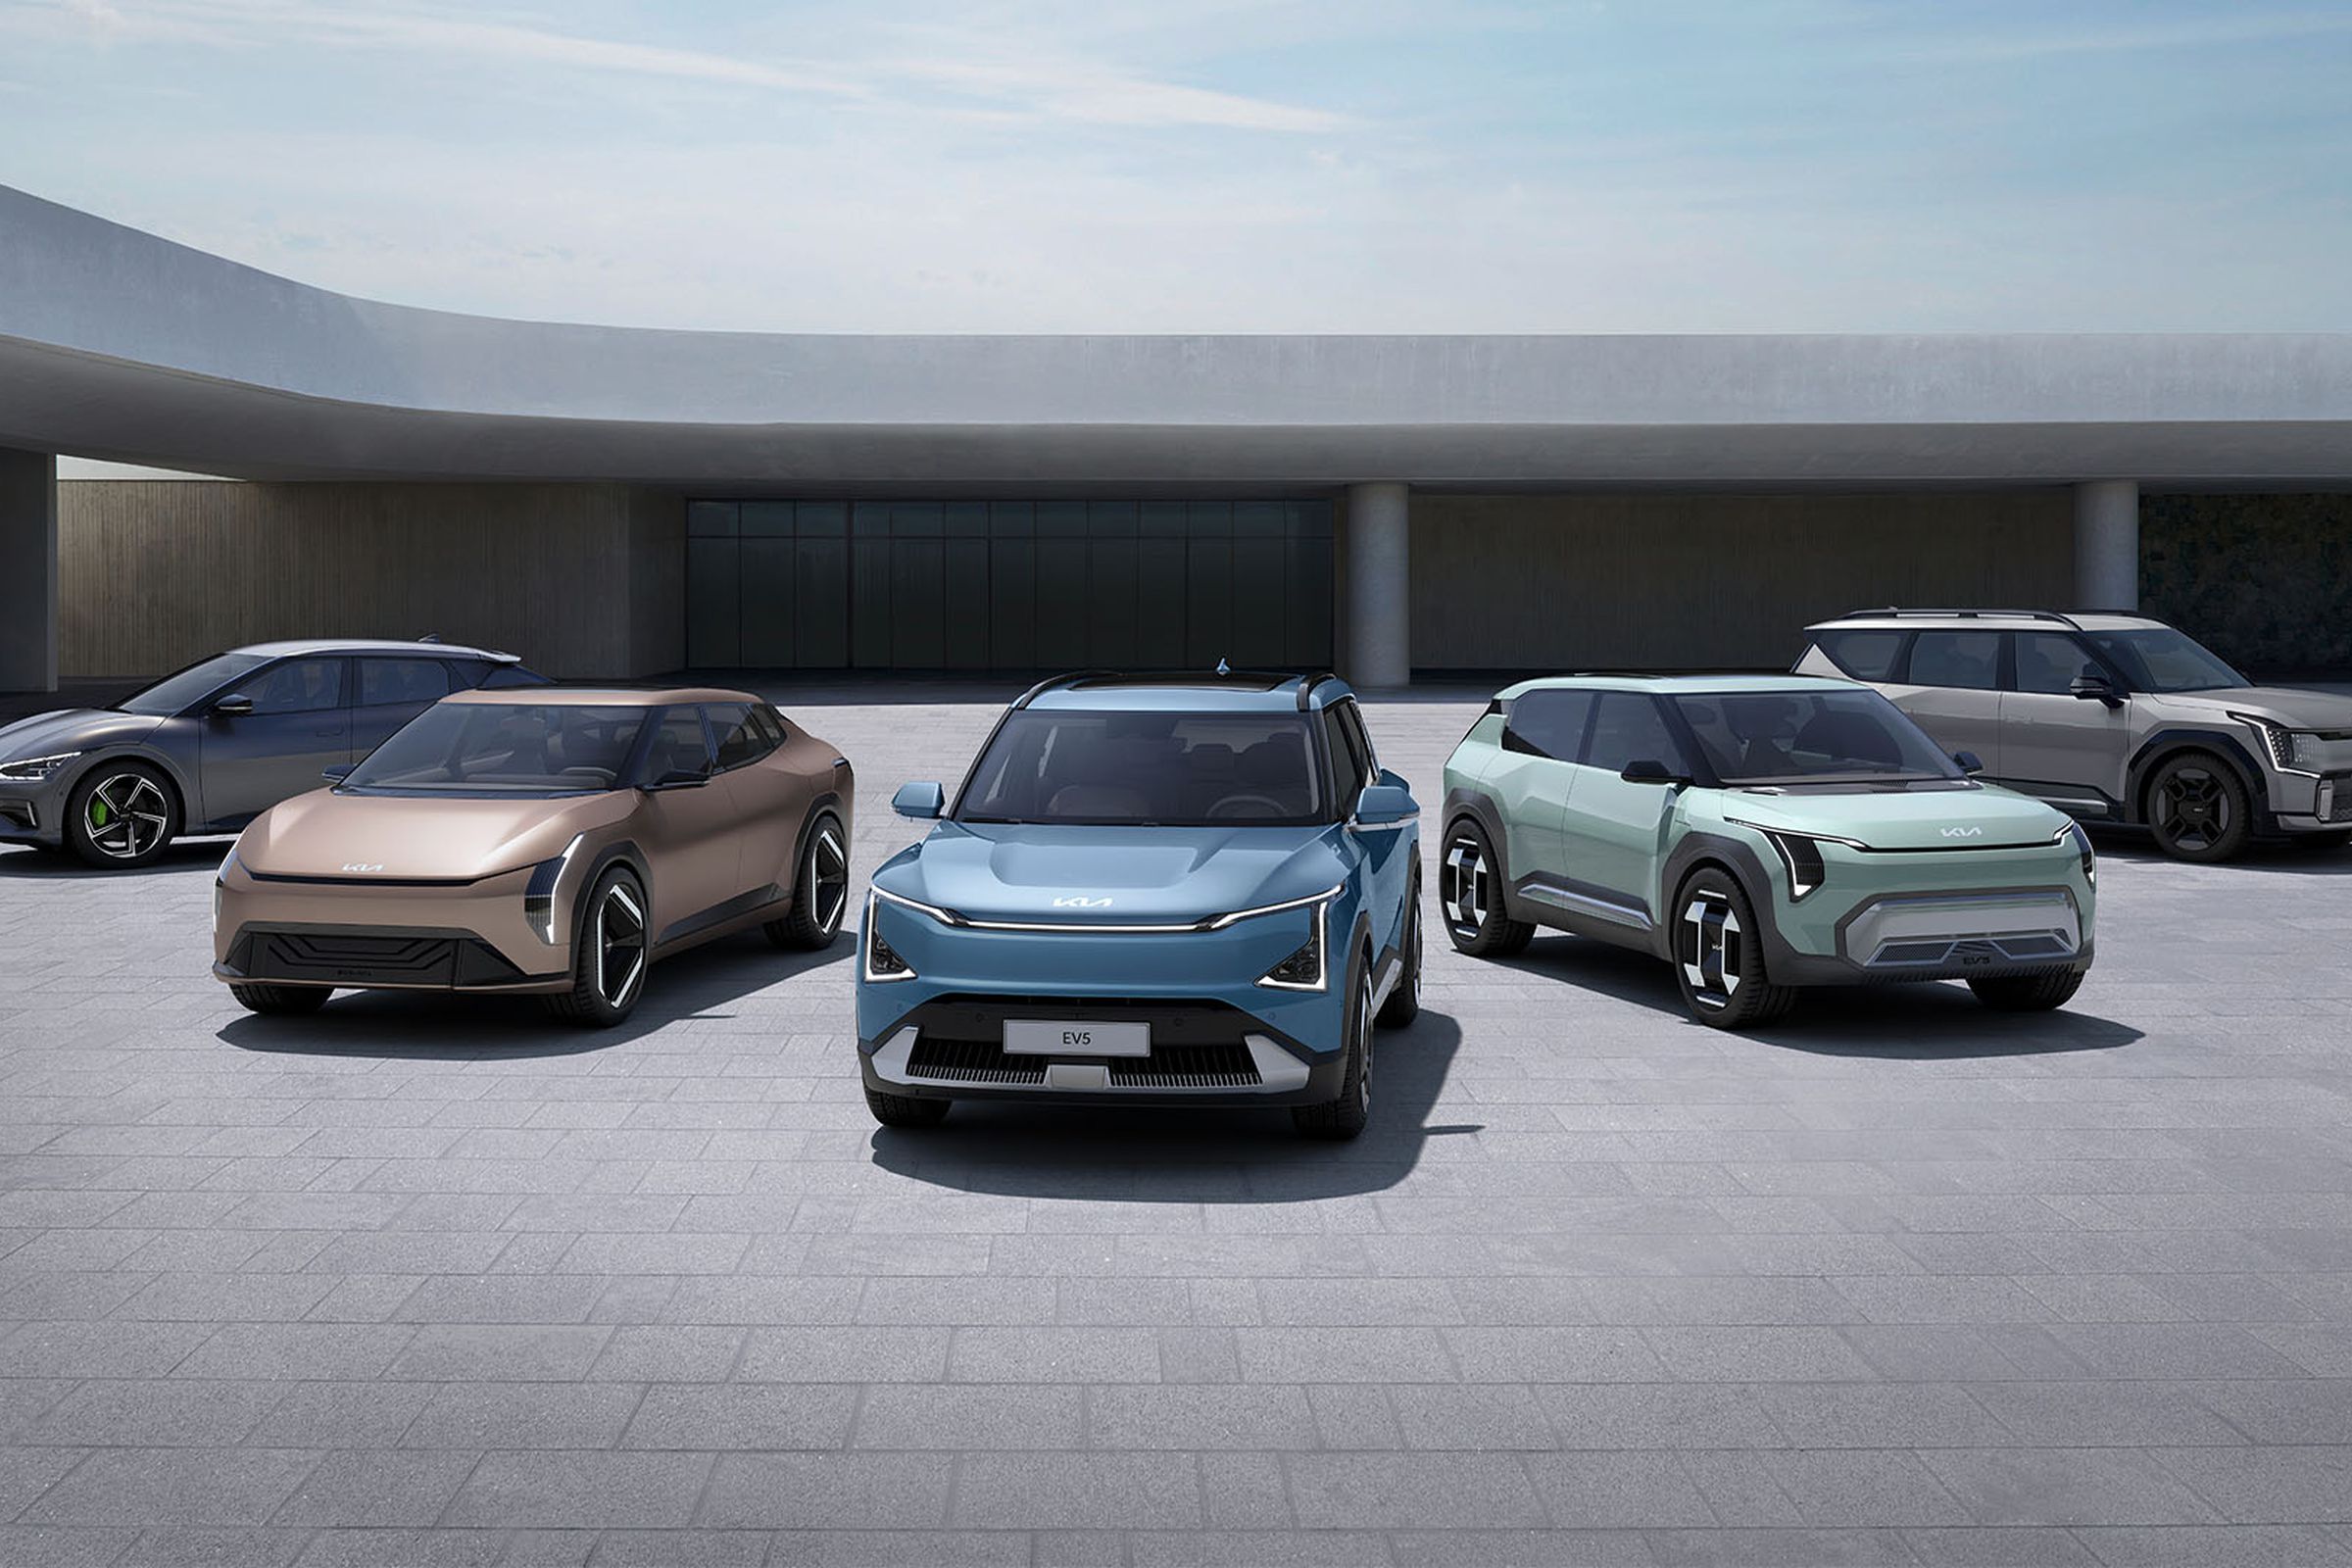 five electric kia vehicles fanned out in a modern architecture area with stone brick flooring